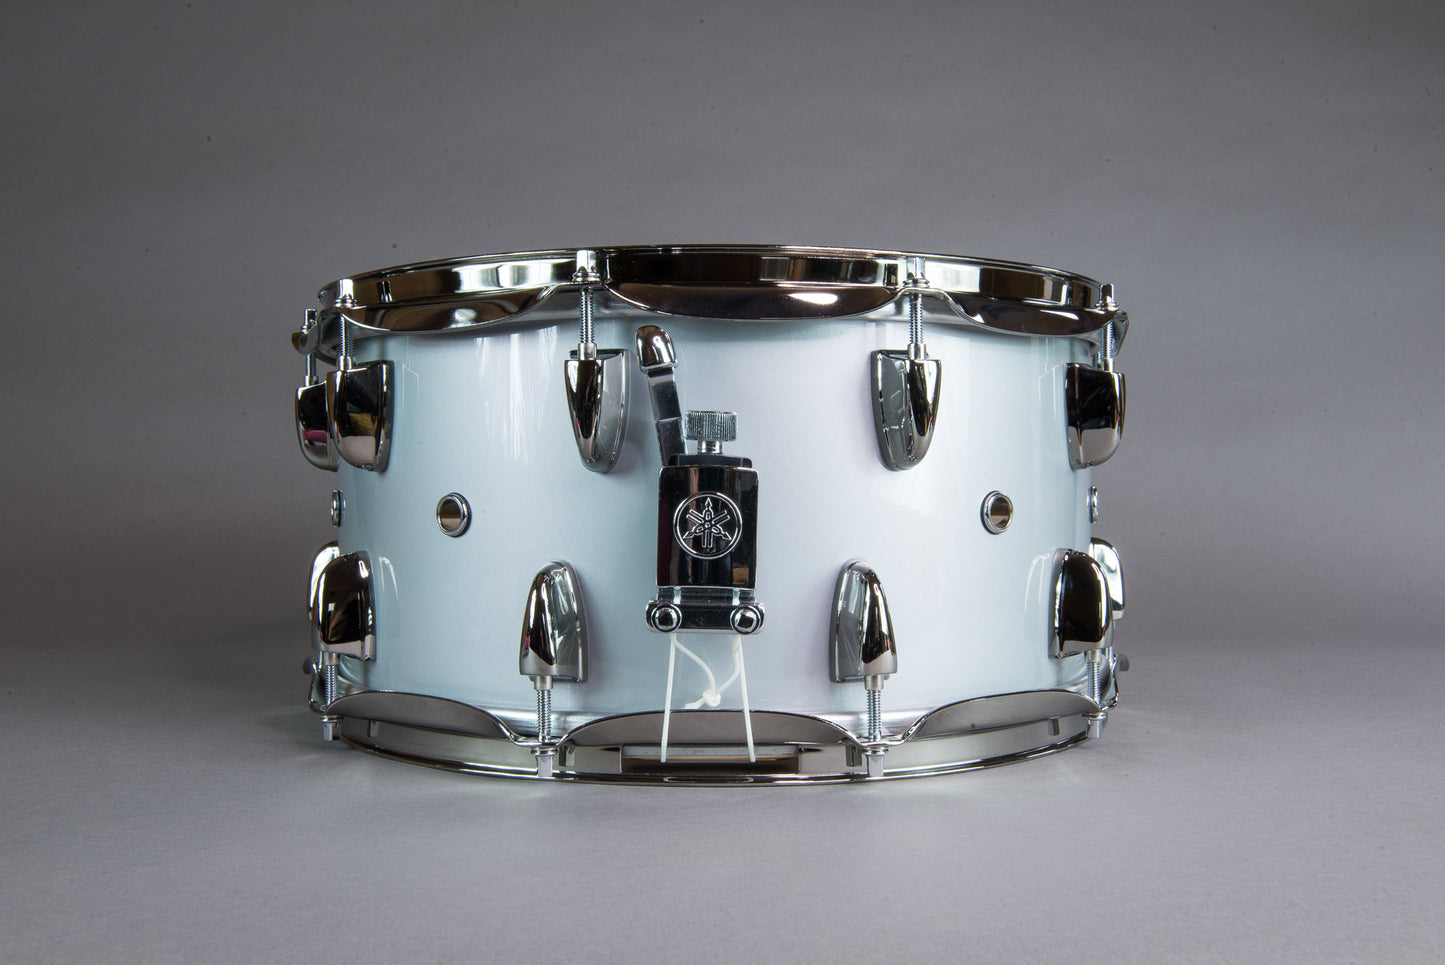 Yamaha 14" x 7" ‘Loud Series’ Snare Drum in Solid Silver